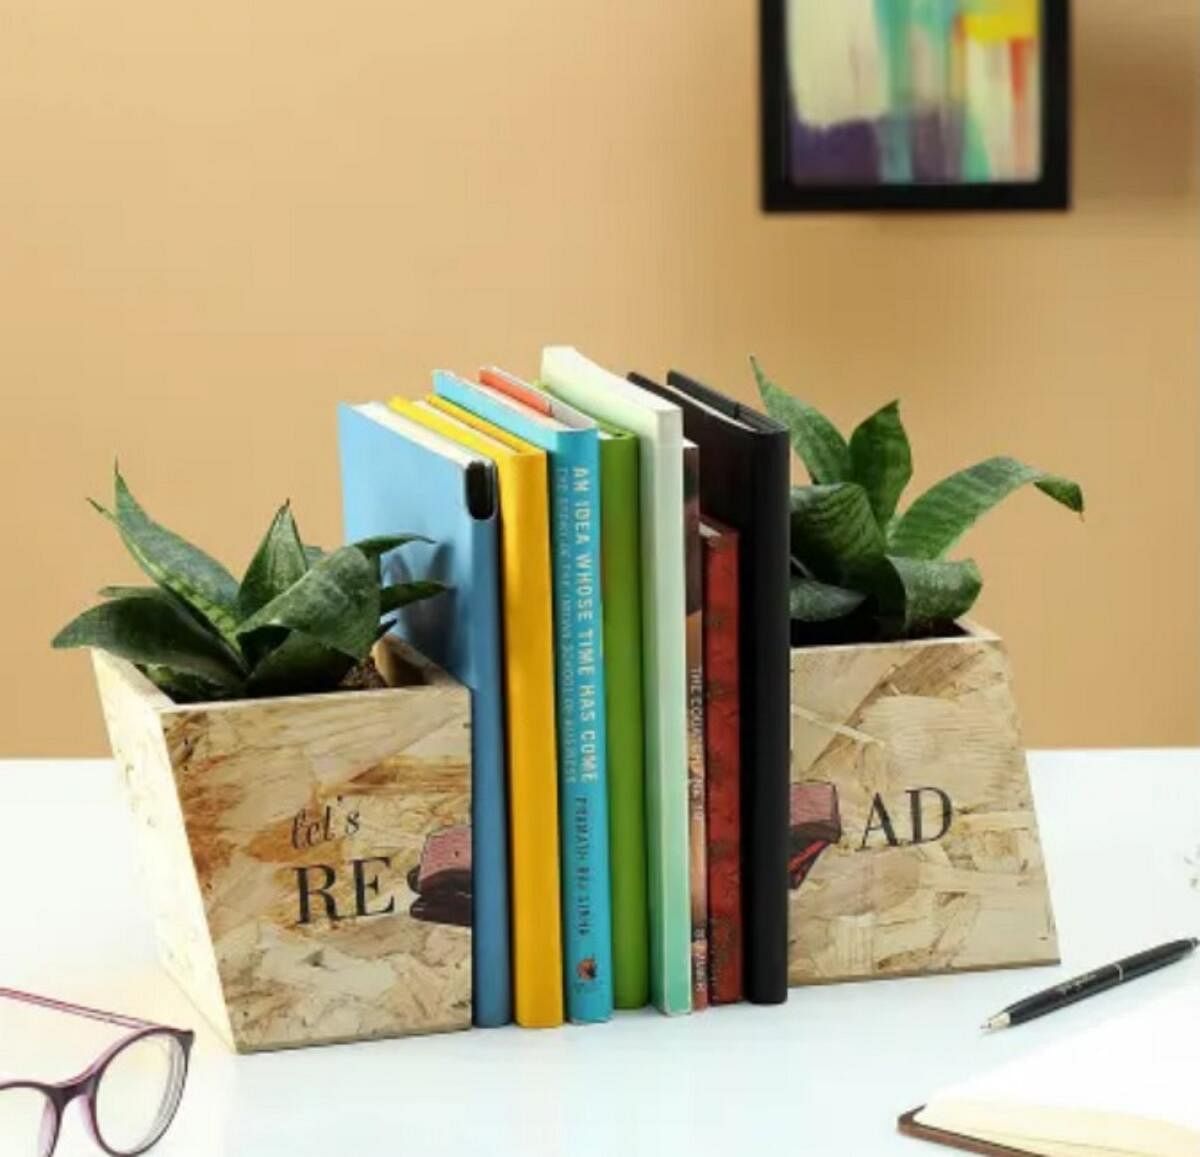 This gift doubles up as a planter, and a bookend.